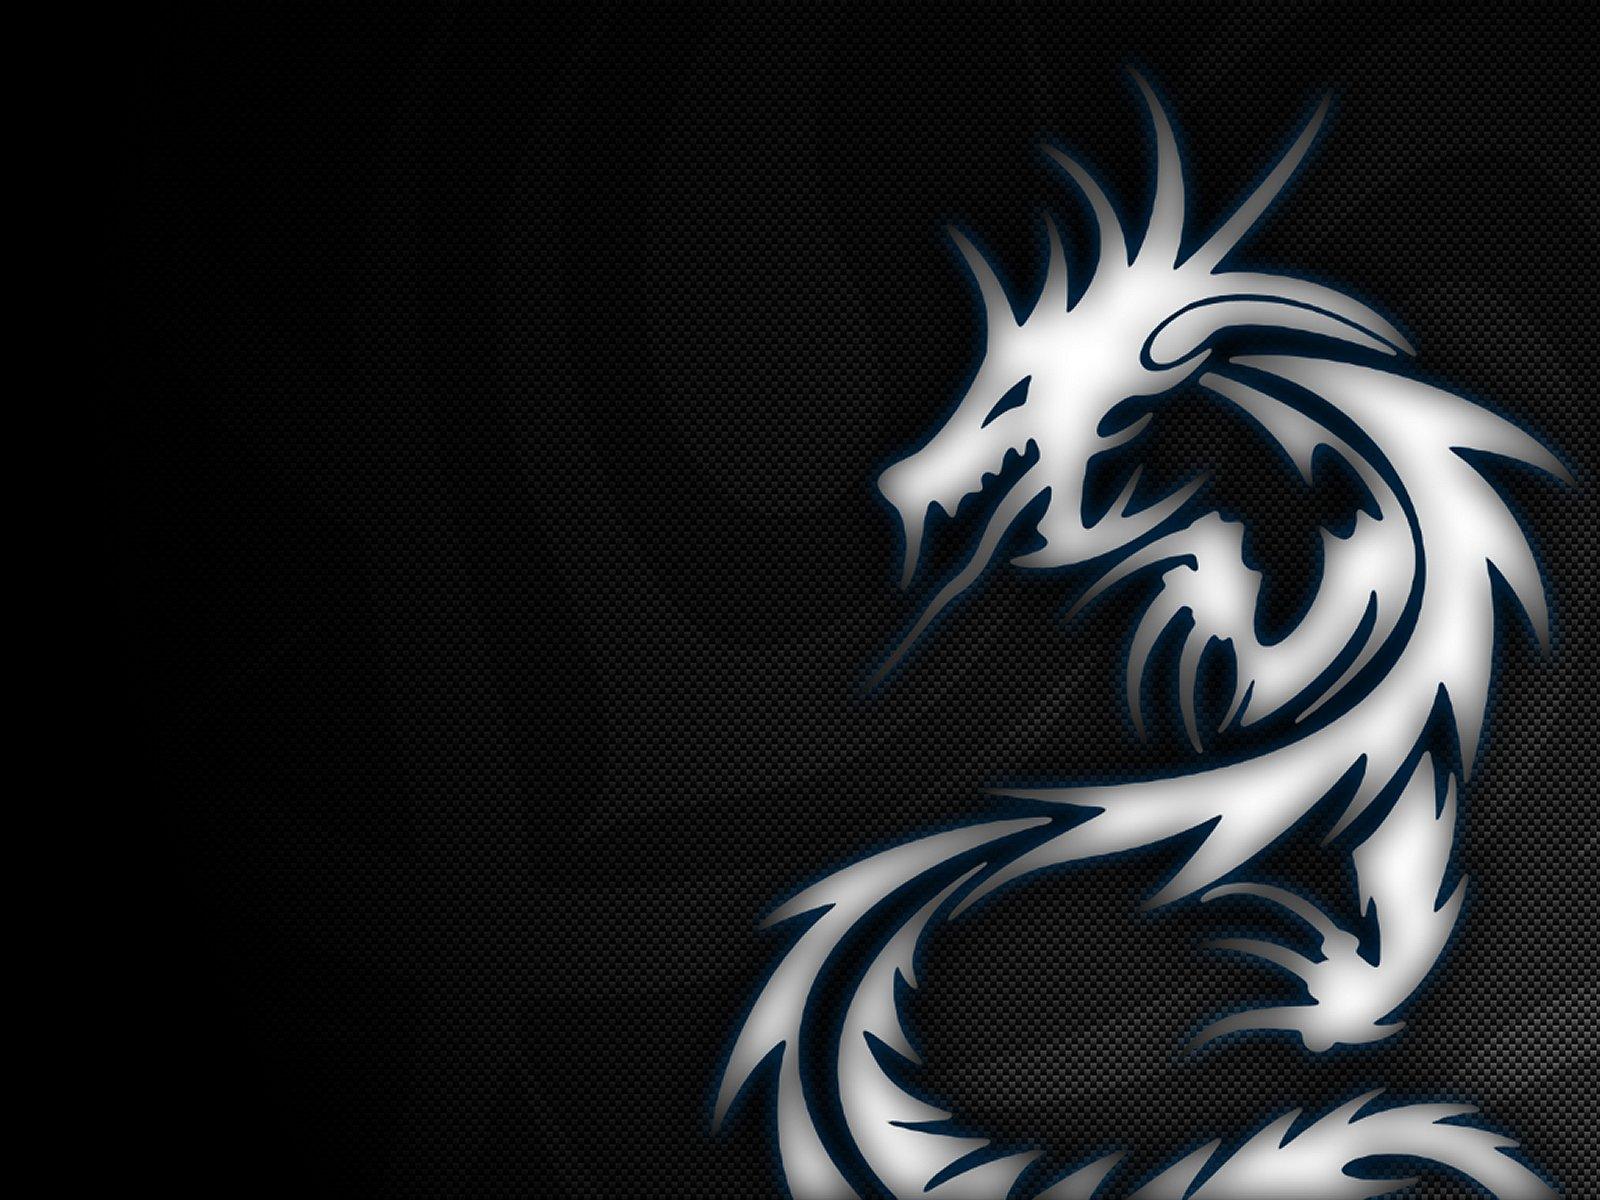 Cool Dragon HD Wallpaper Backgrounds Free Download